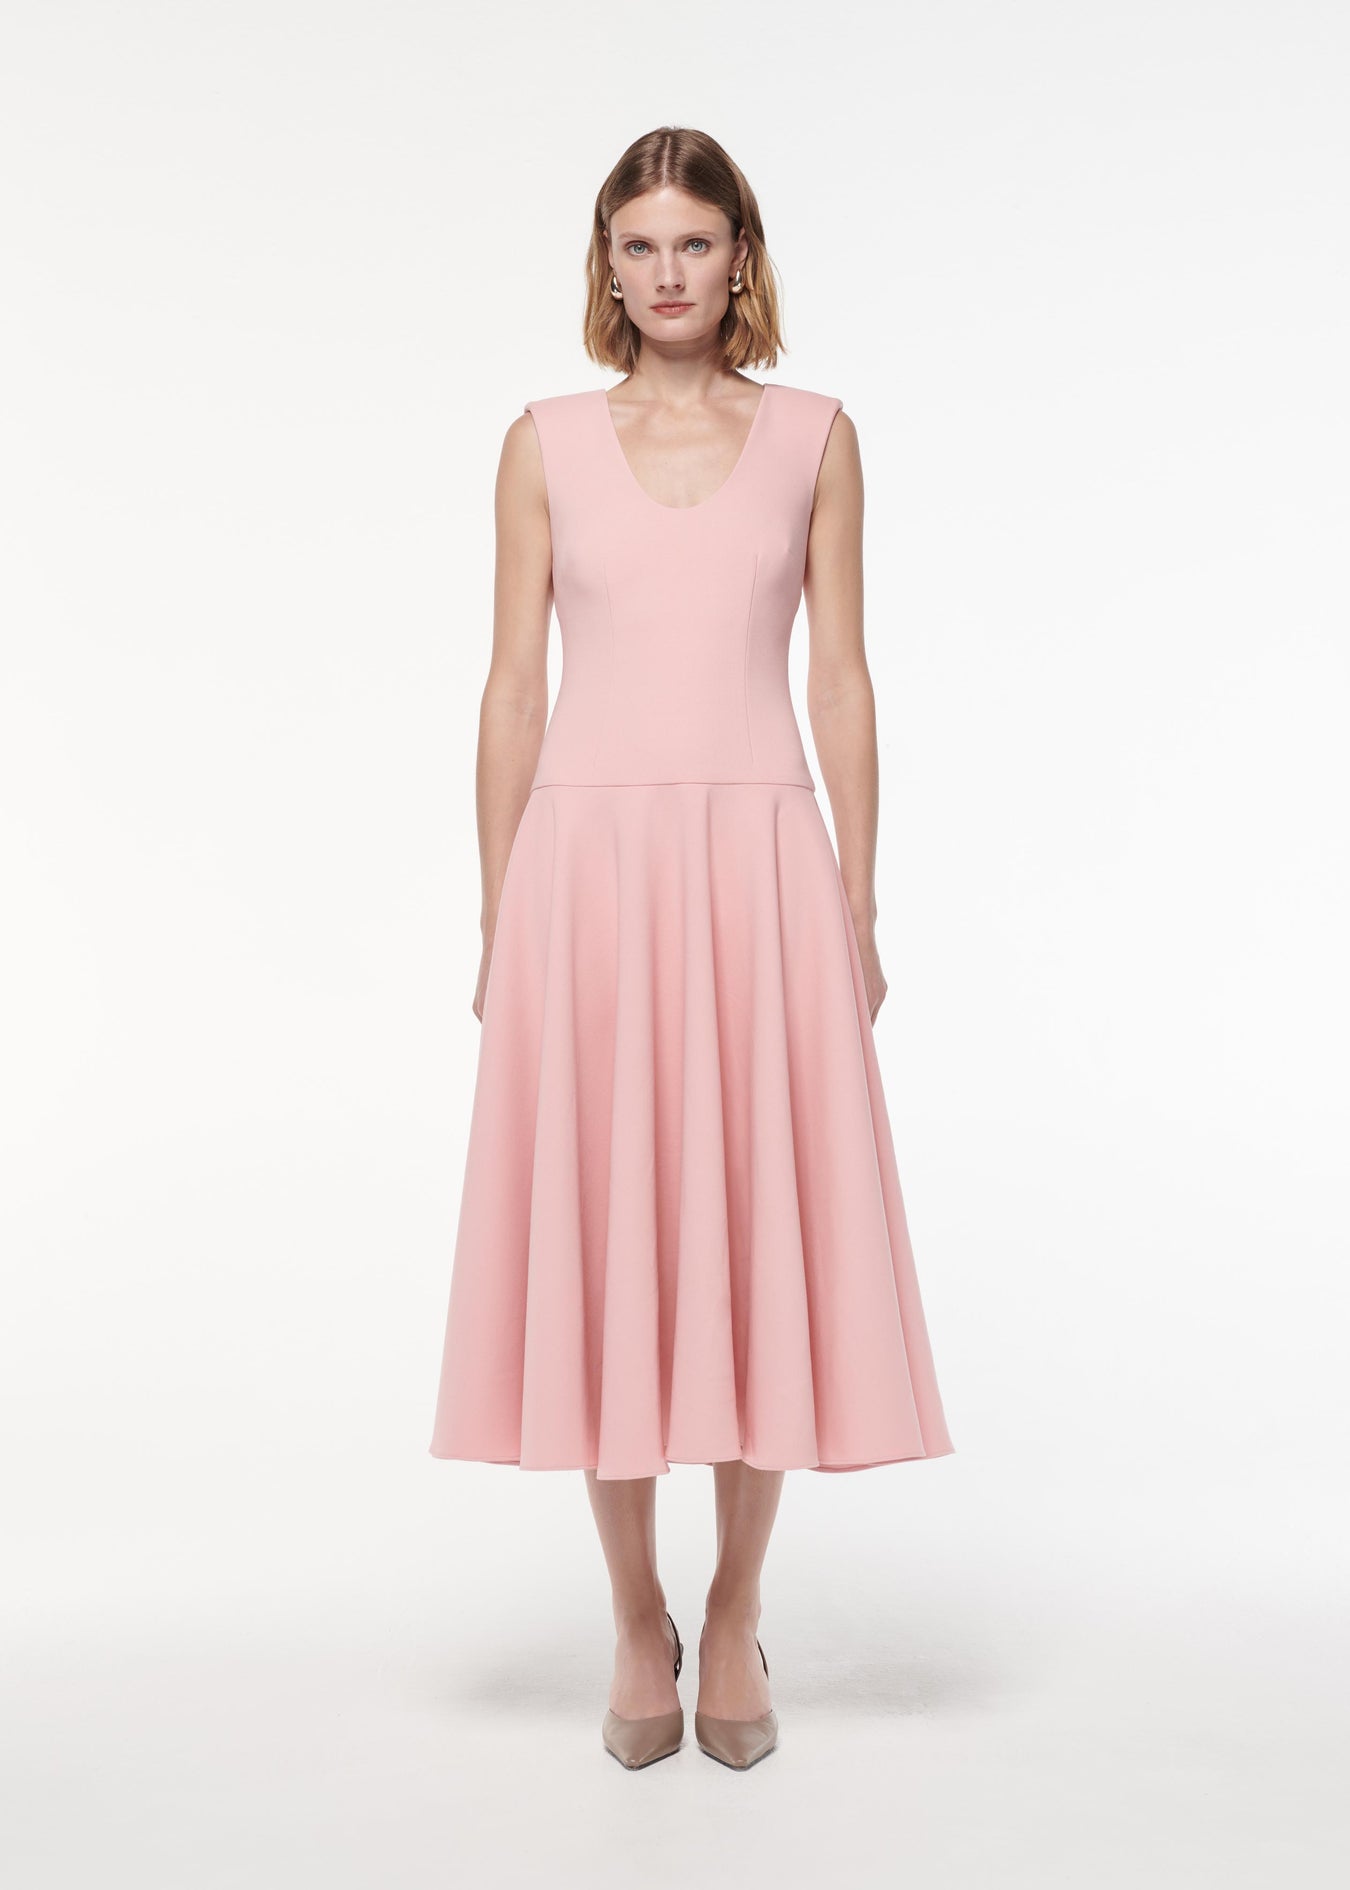 A photograph of a woman wearing a Drop Waist Detail Crepe Midi Dress in Pink